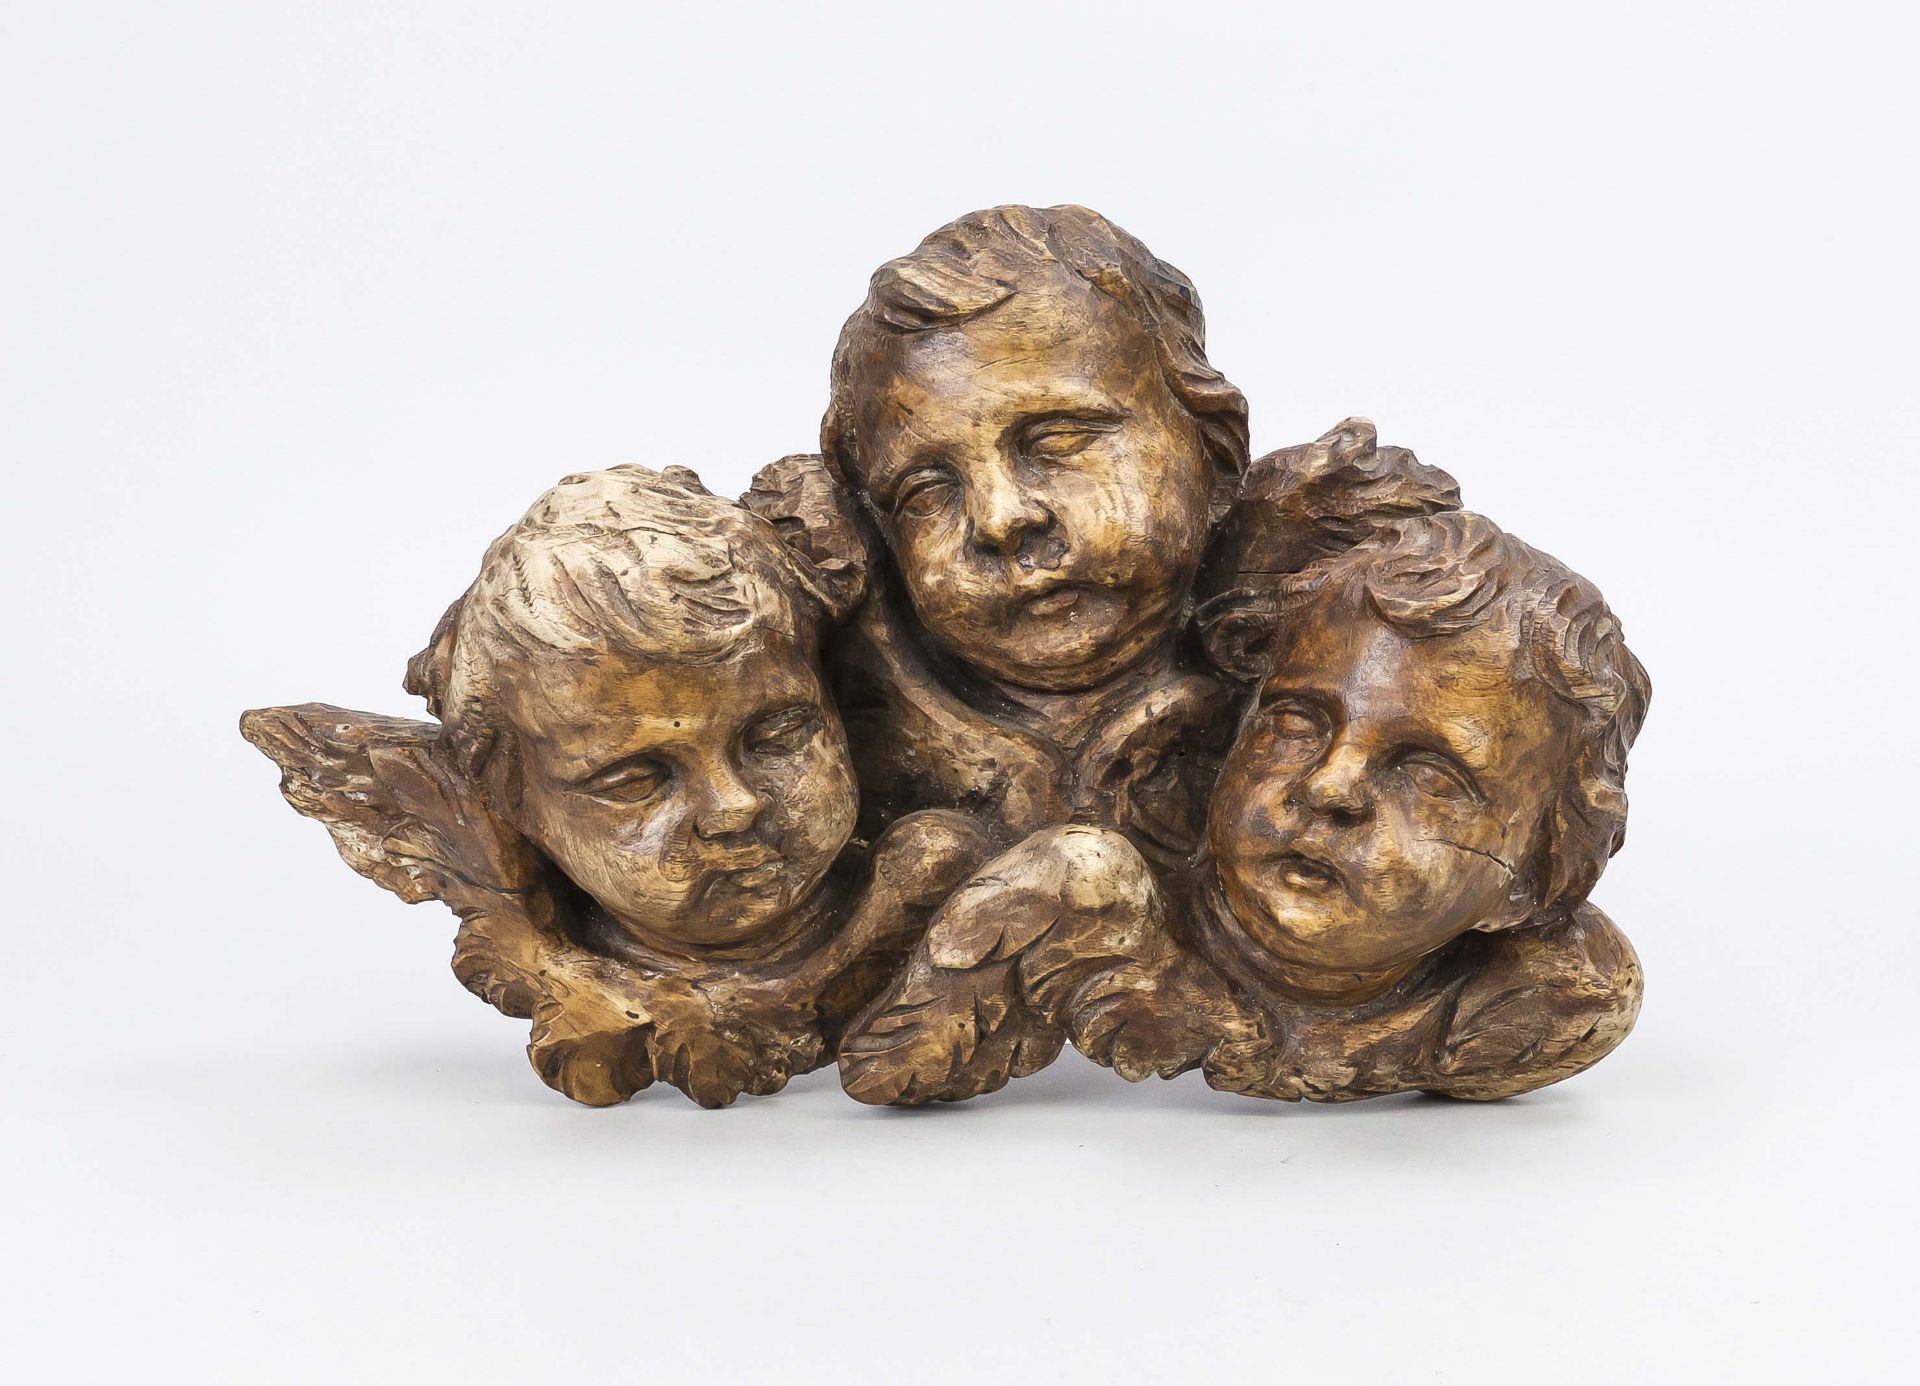 3 Putti Heads, 18th century, carved limewood, probably formerly part of a larger group, small iron